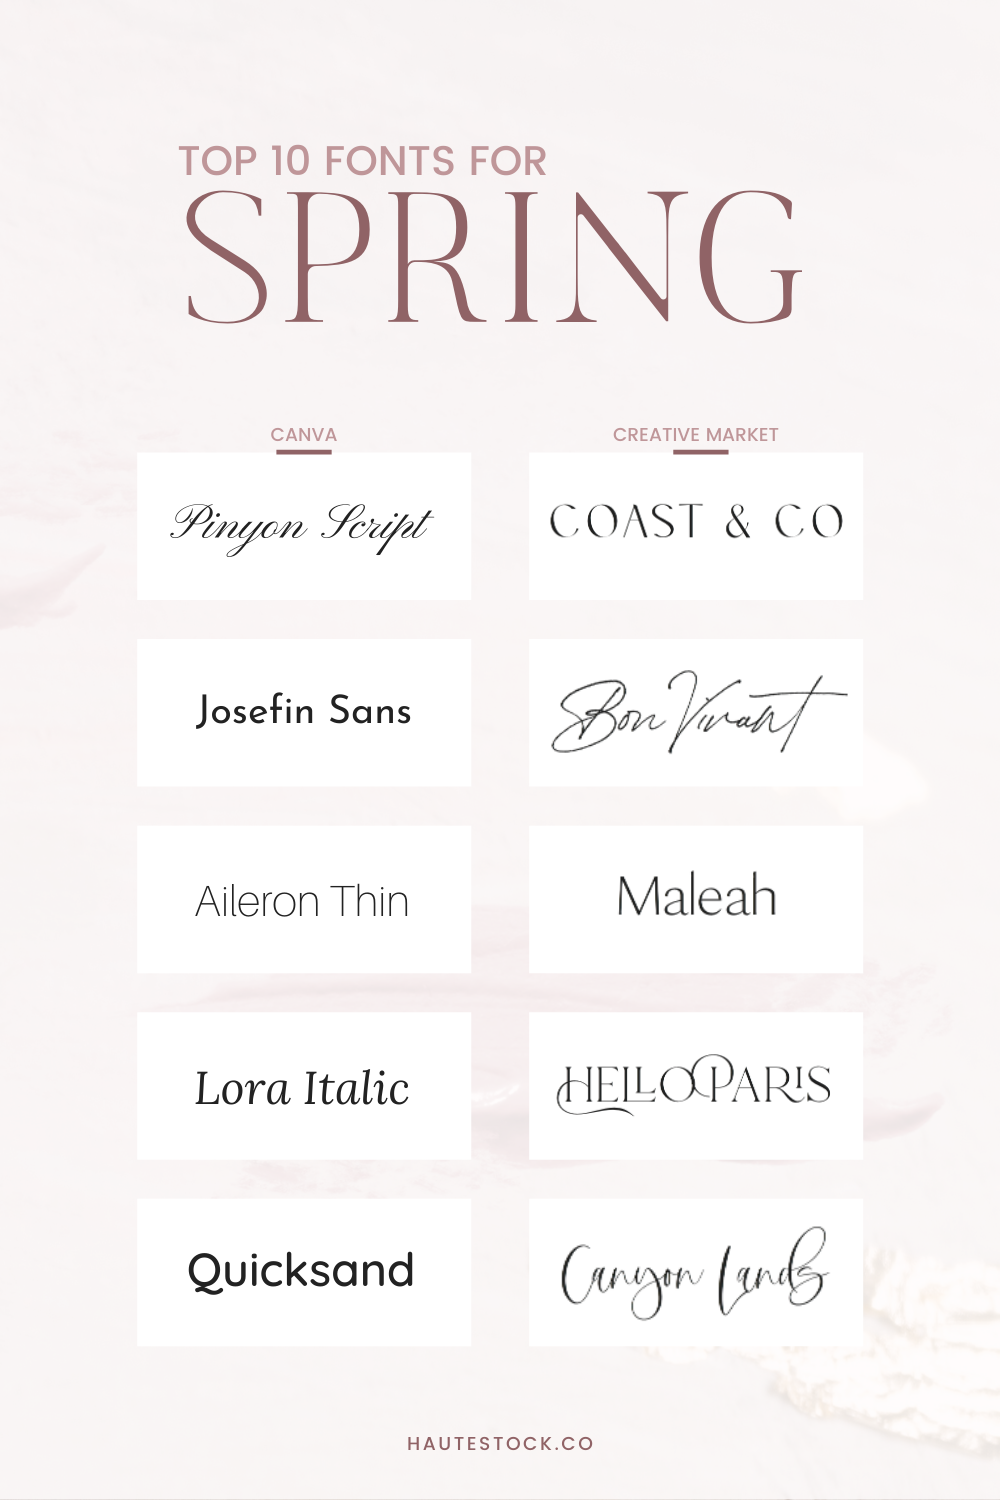 Haute Stock's top 10 fresh font finds for Spring. Best script fonts for Canva and Creative Market. Best display fonts for Canva and Creative Market. Best sans serif fonts for Creative Market and Canva. Free Canva fonts.